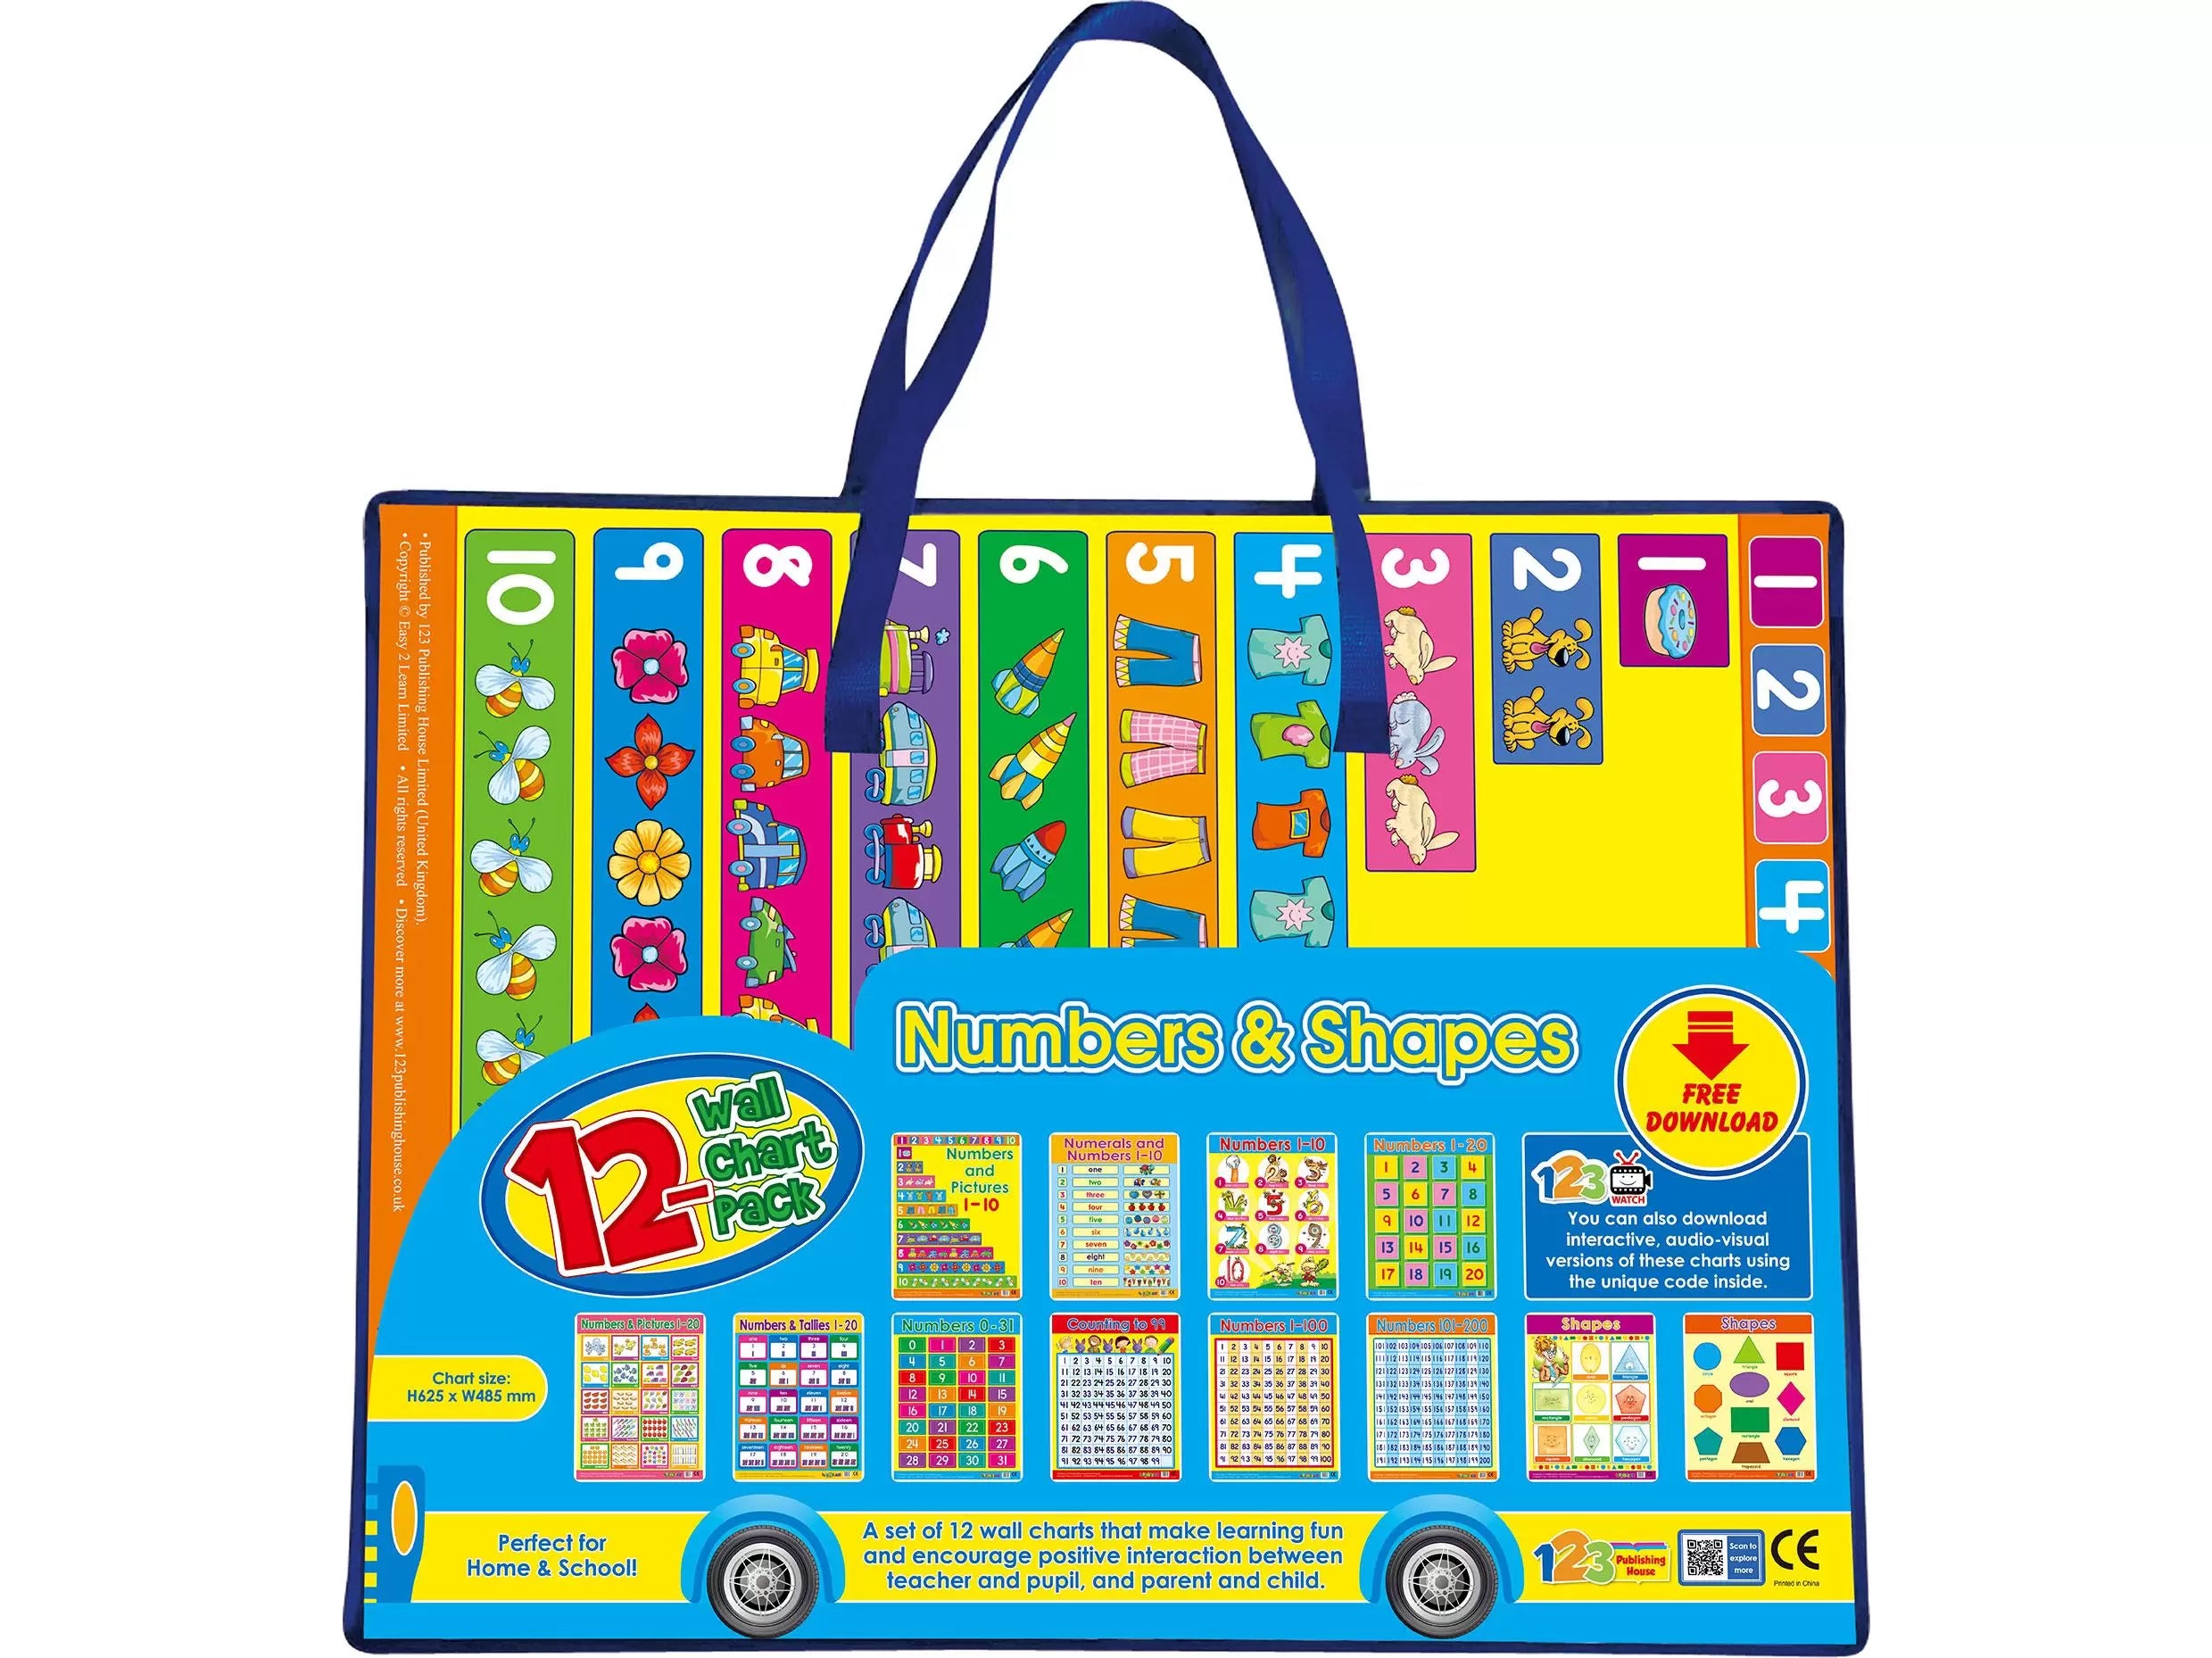 Numbers & Shapes (12 Wall Charts) - Educational Wall Chart Pack in English